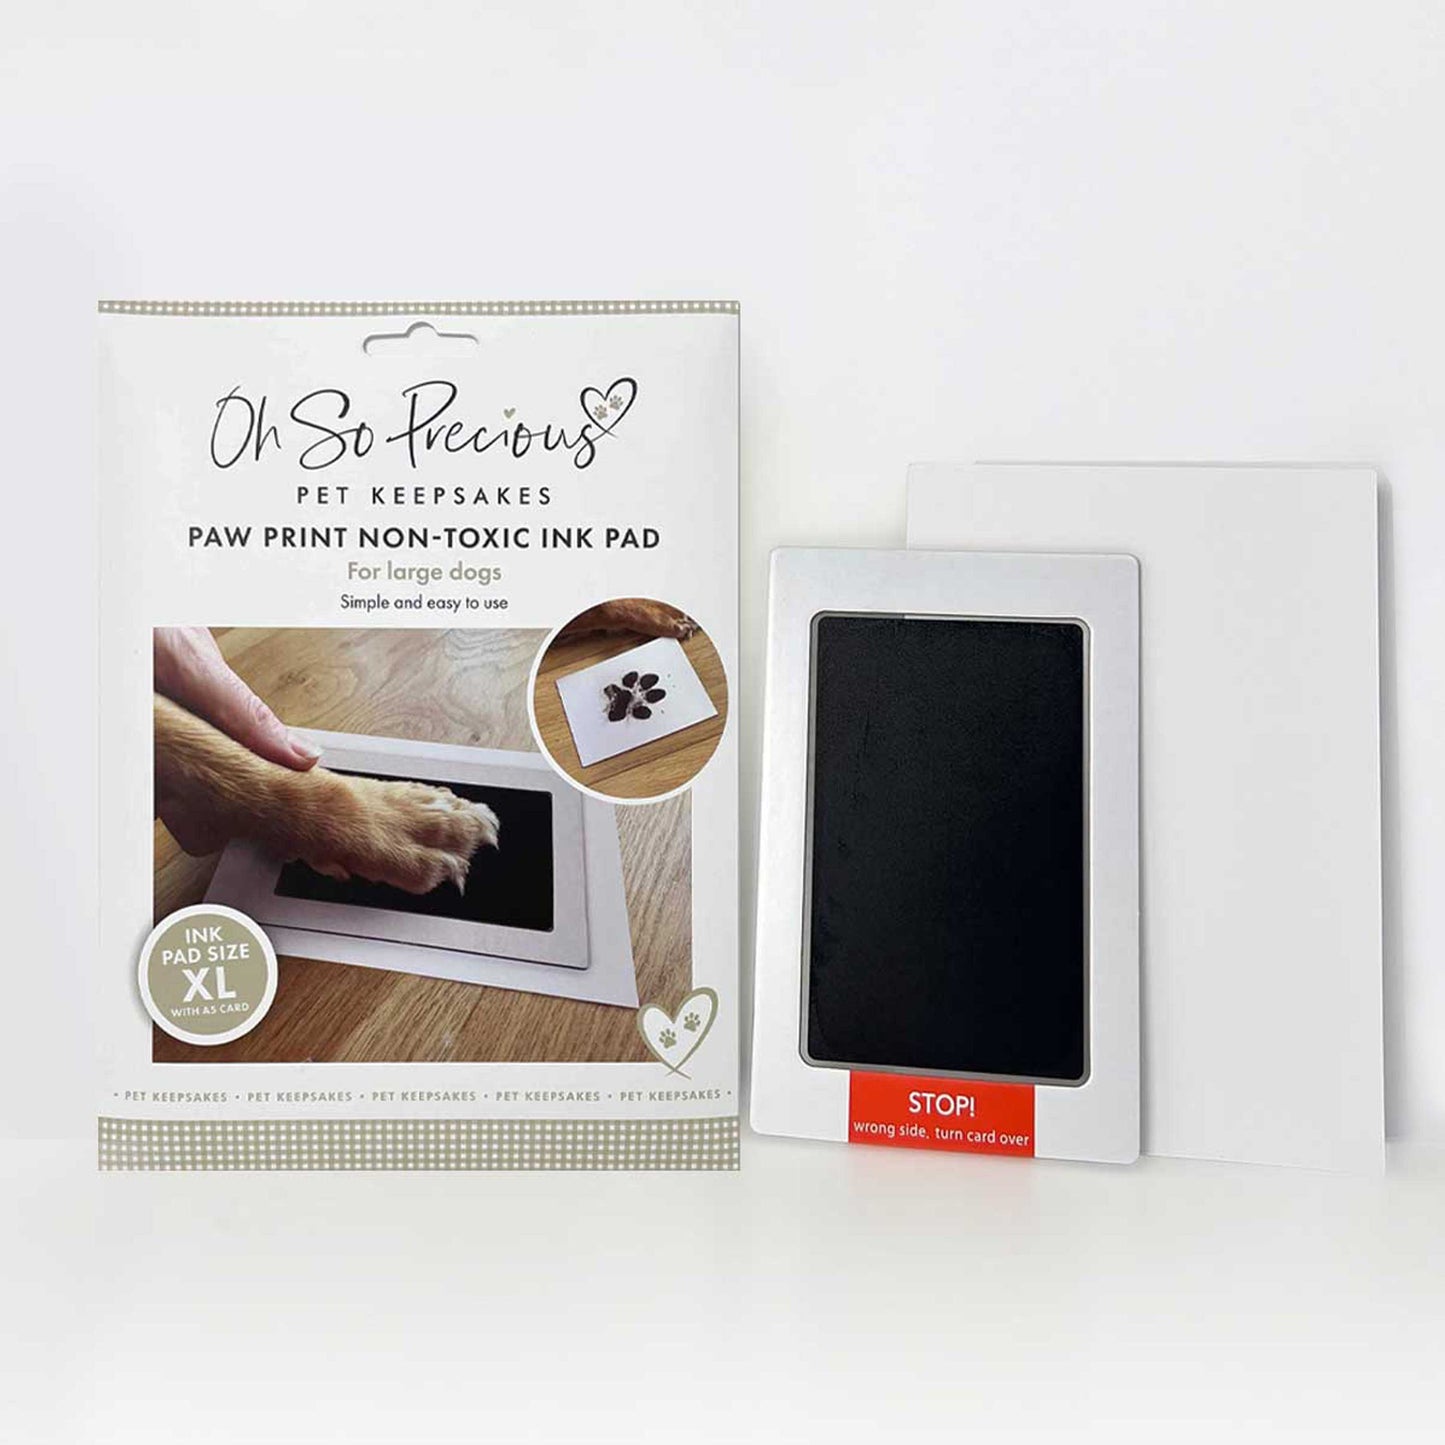 Pet Safe Non-toxic Paw Print Ink Pad Kit for Larger Paws